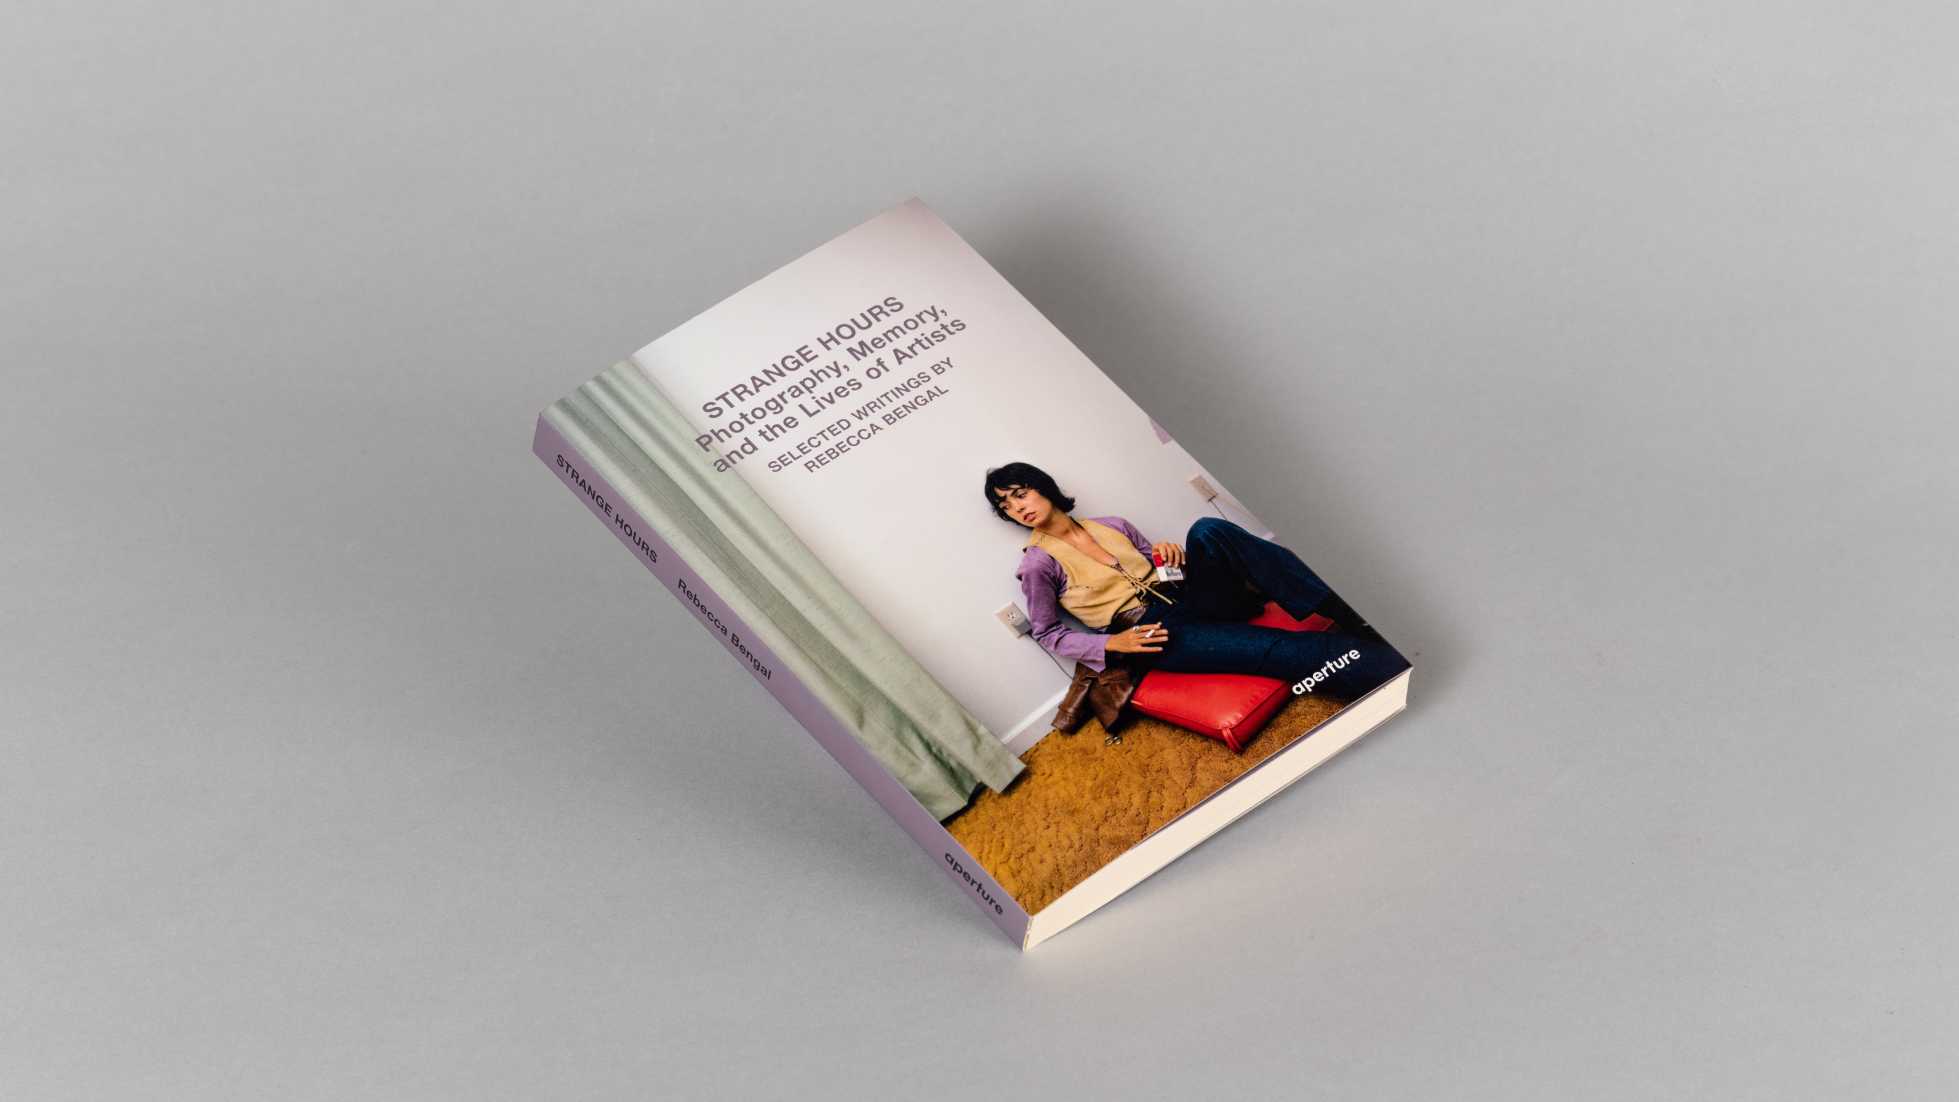 Book cover with purple text over a color photograph of a woman seated on the floor smoking a cigarette.